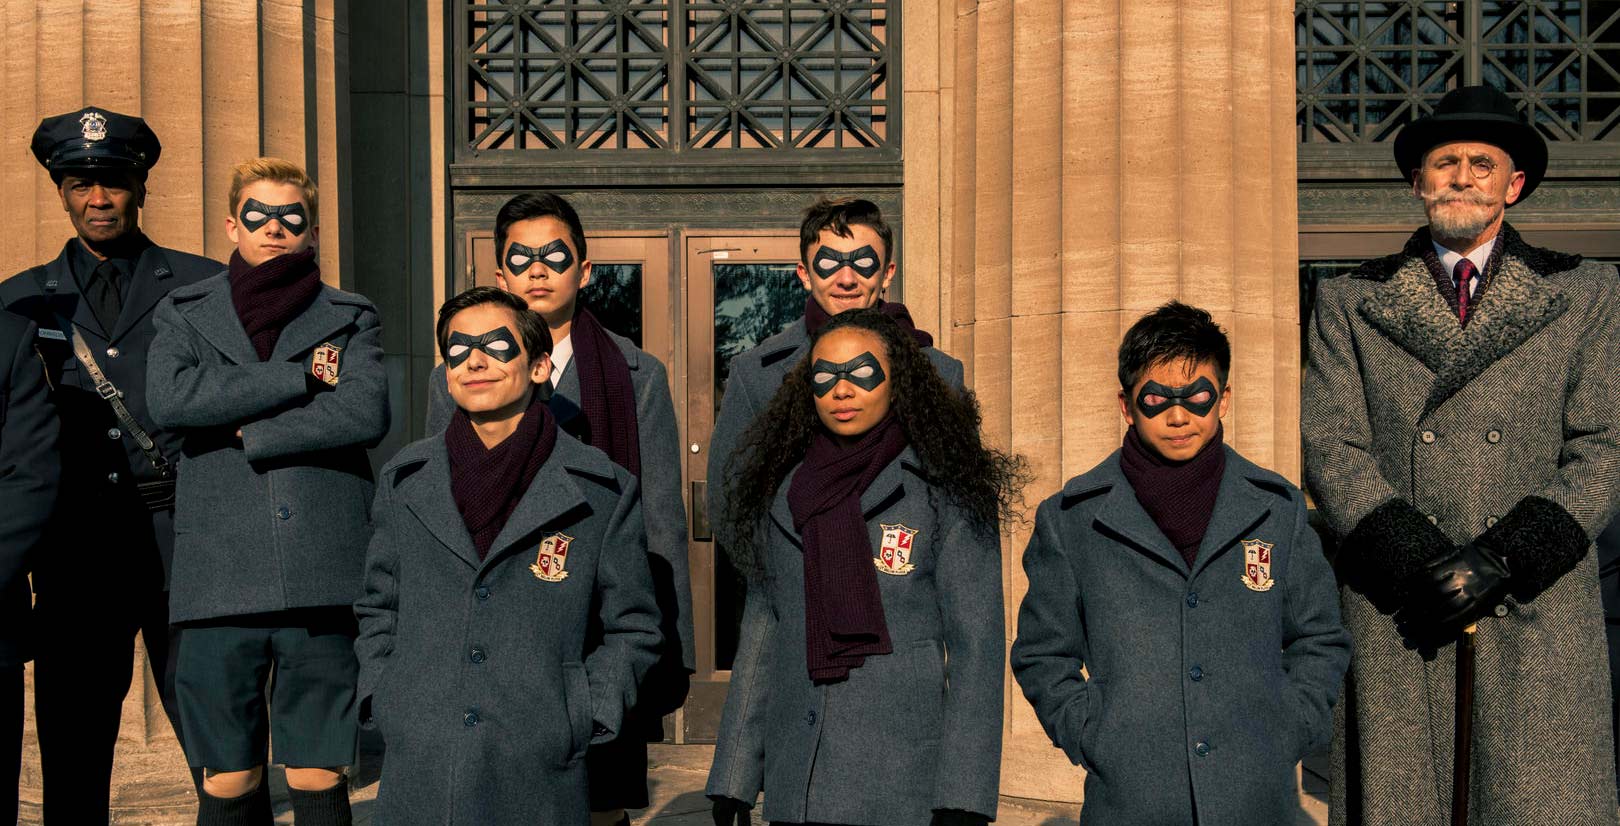 Umbrella Academy trailer shows 'dysfunctional family with a body count'